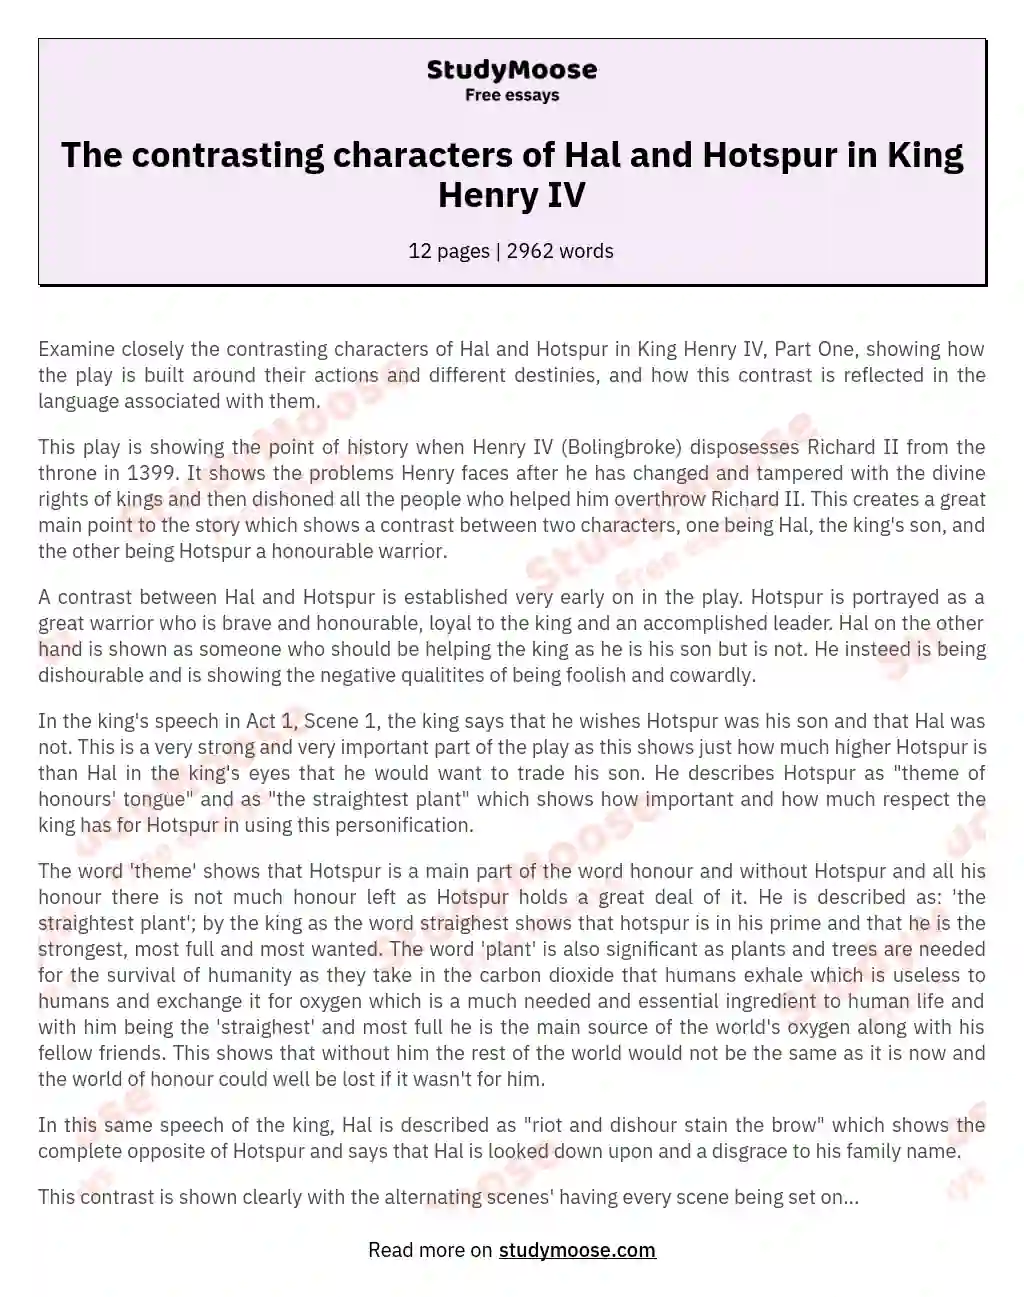 The contrasting characters of Hal and Hotspur in King Henry IV essay